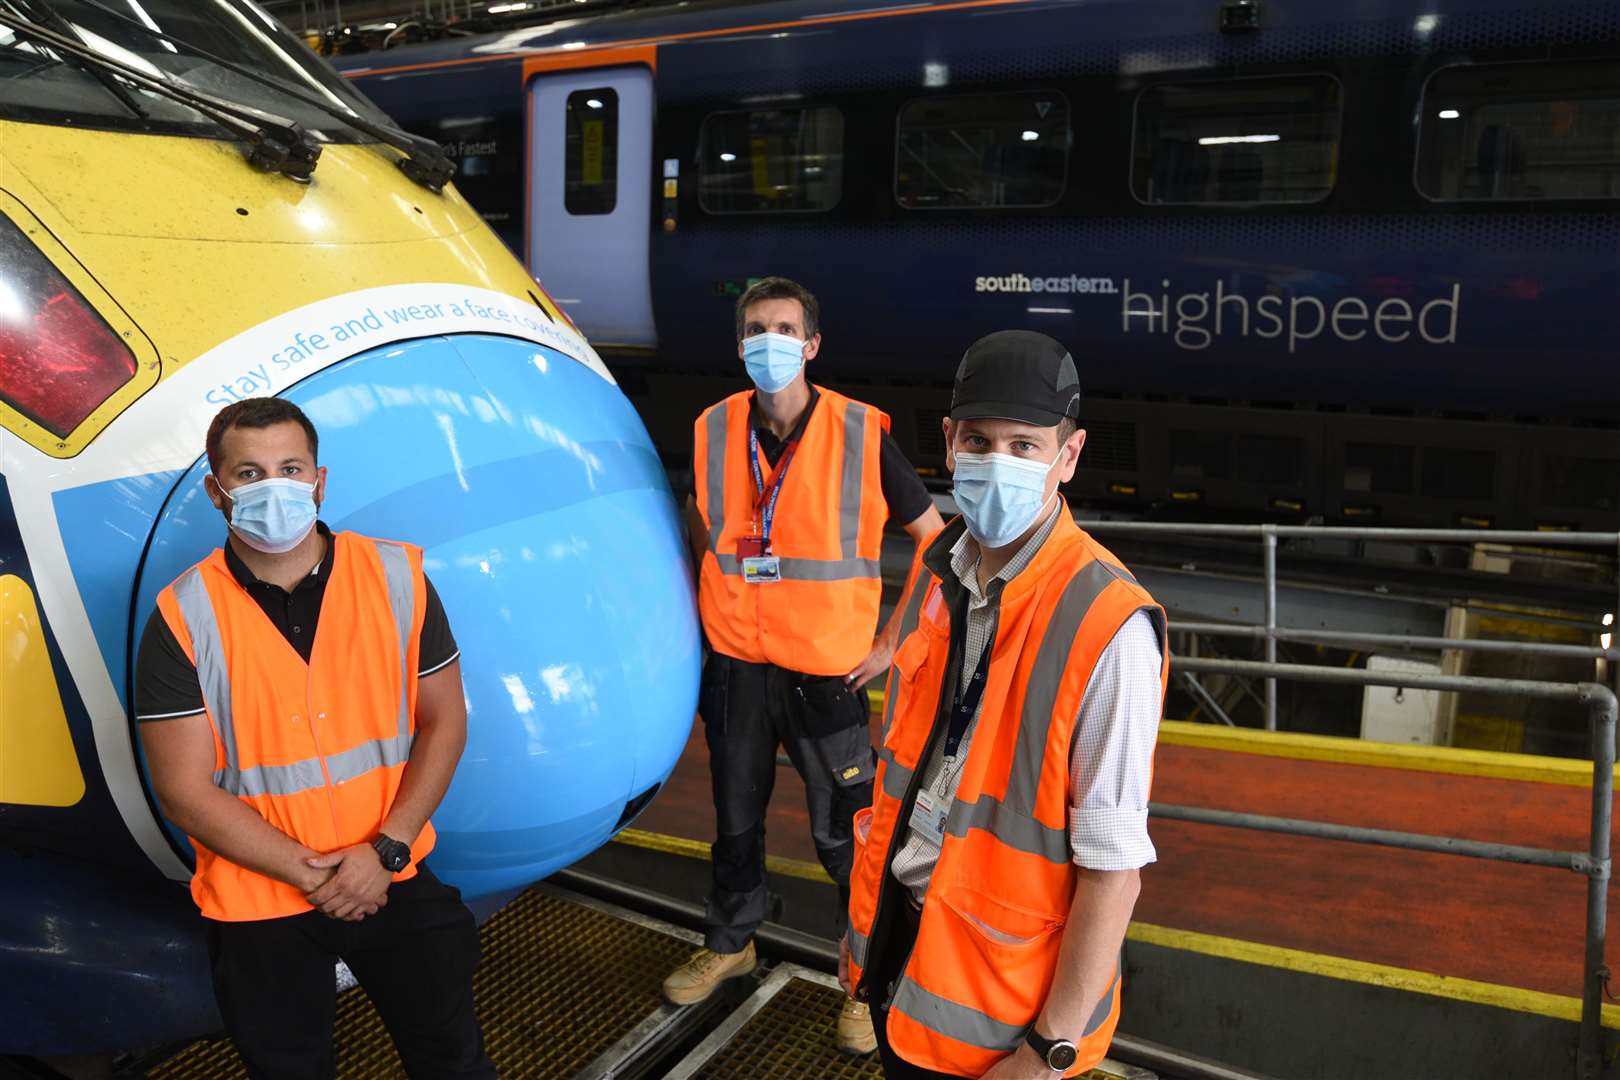 Even Southeastern trains - along with their staff - were given face coverings.